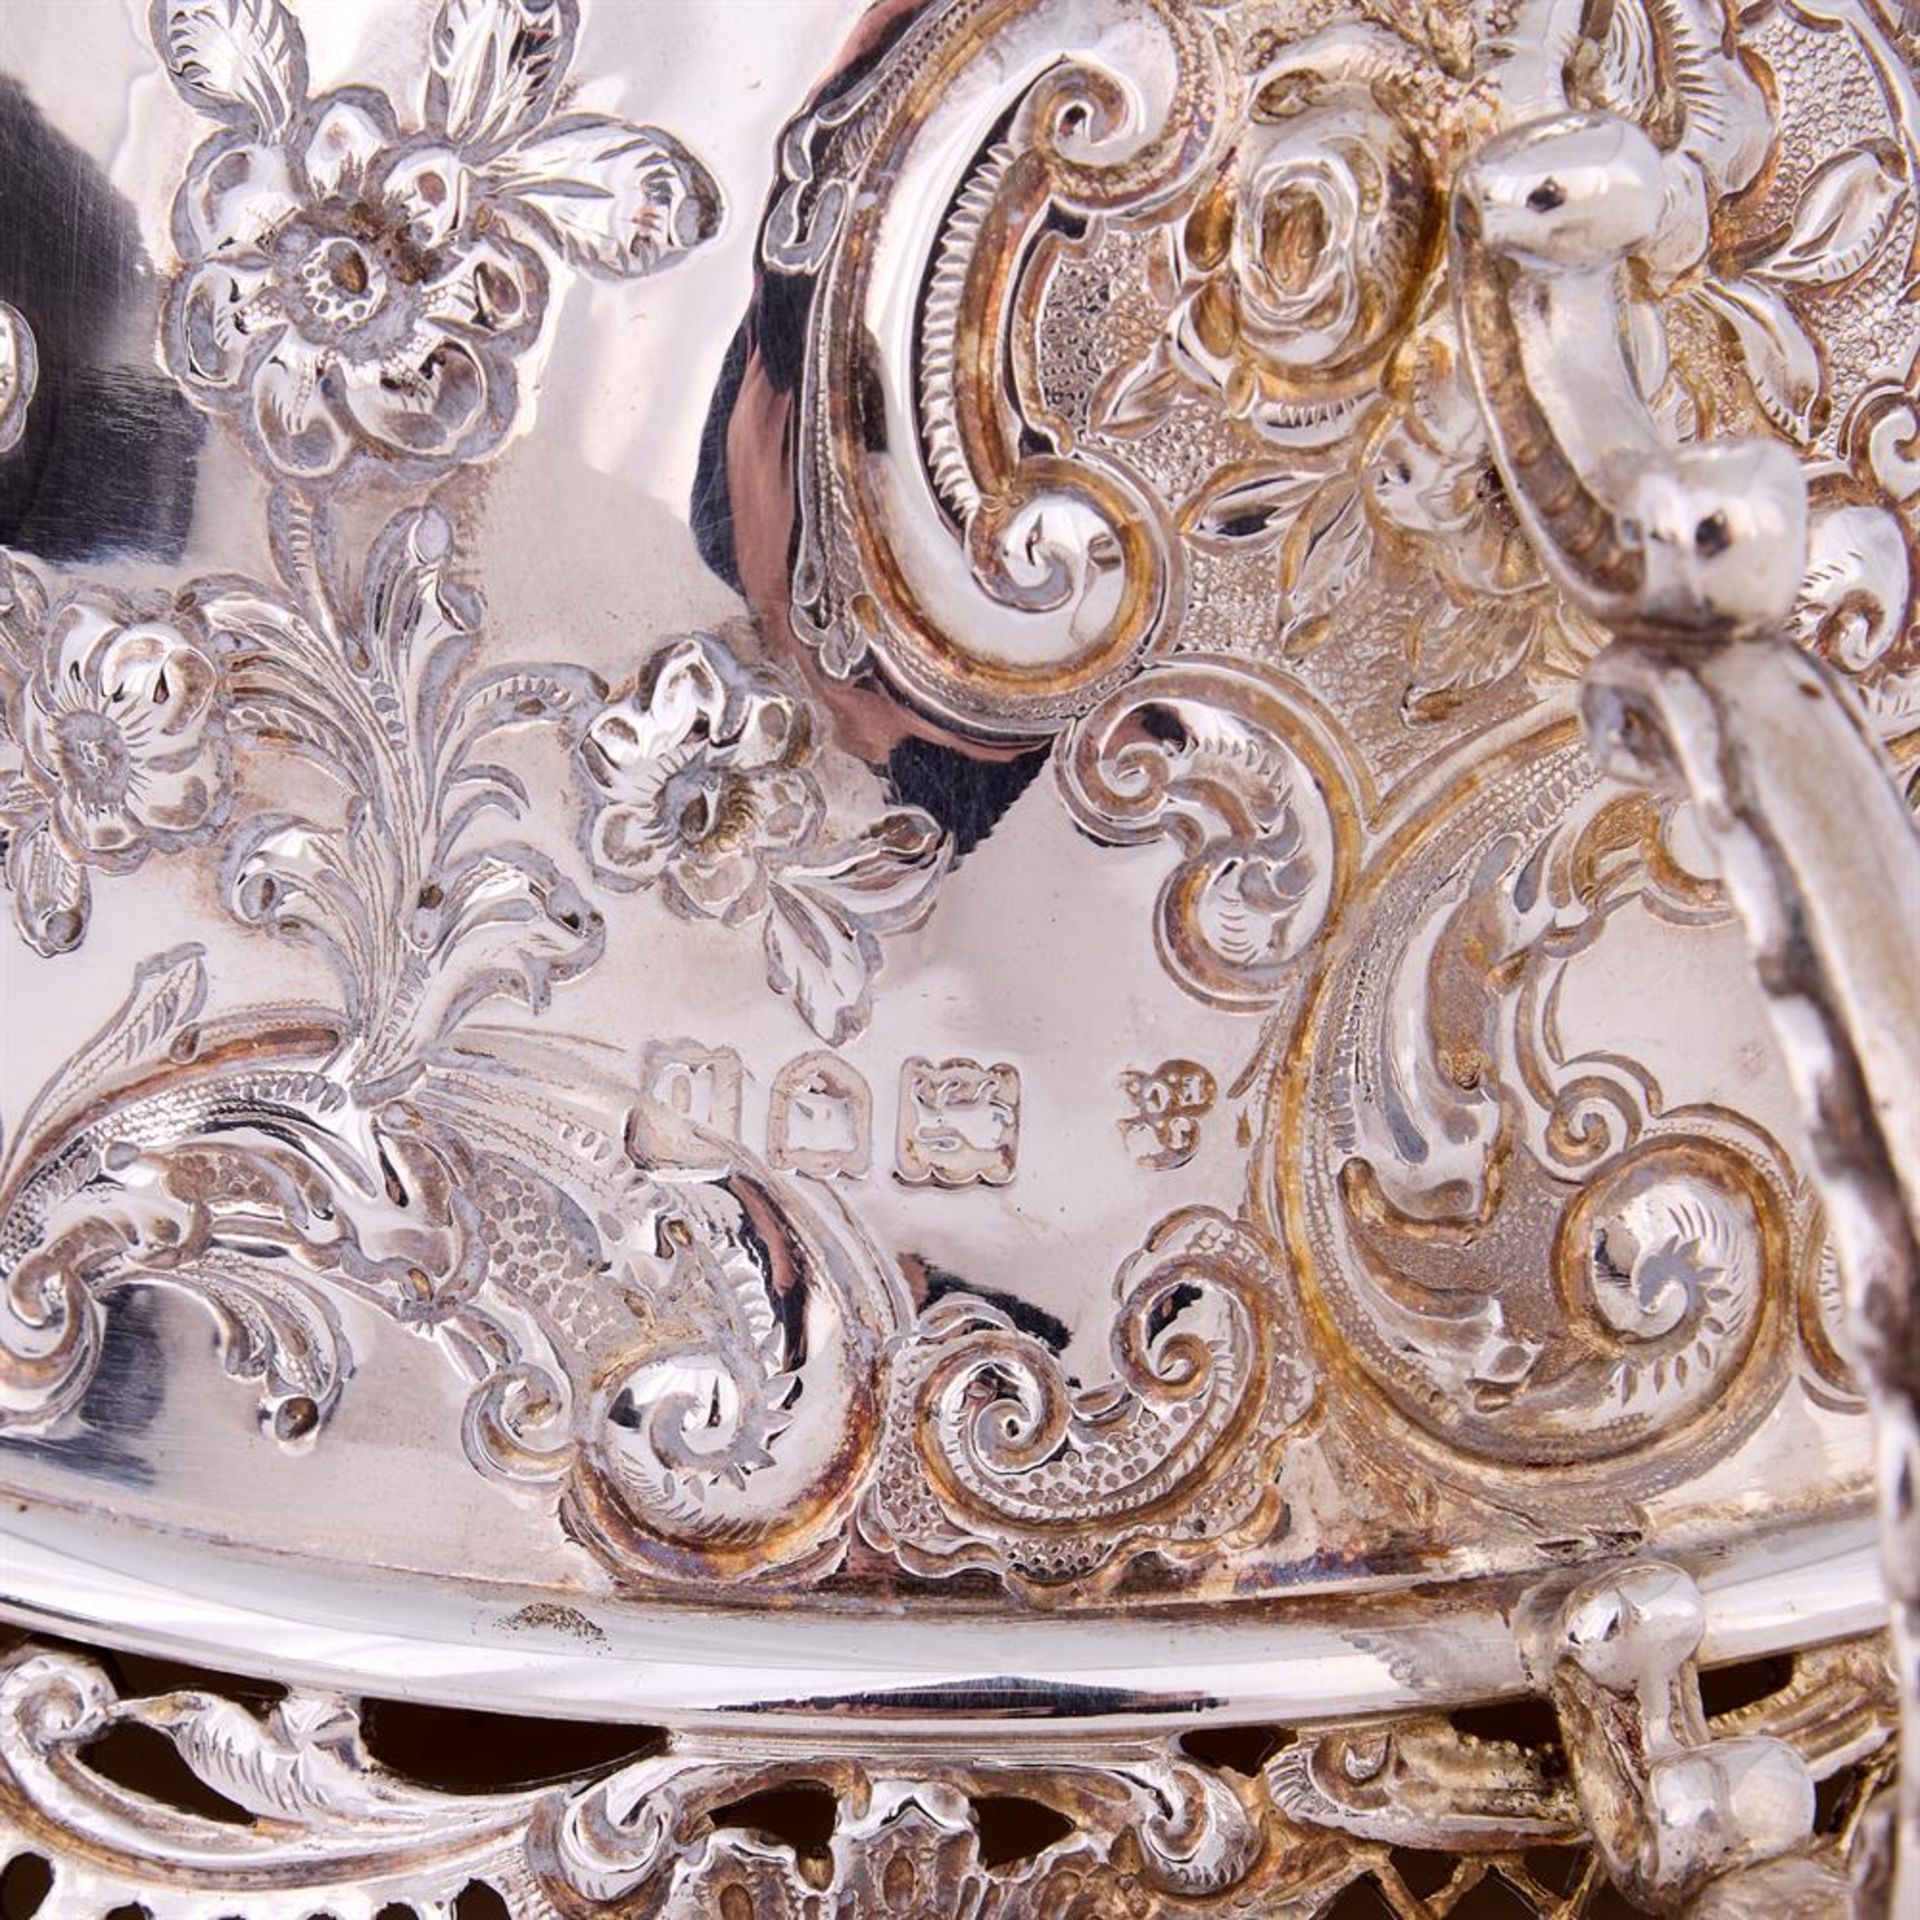 A CASED VICTORIAN CHRISTENING SILVER TWIN HANDLED BOWL, KNIFE, FORK AND SPOON - Image 2 of 3